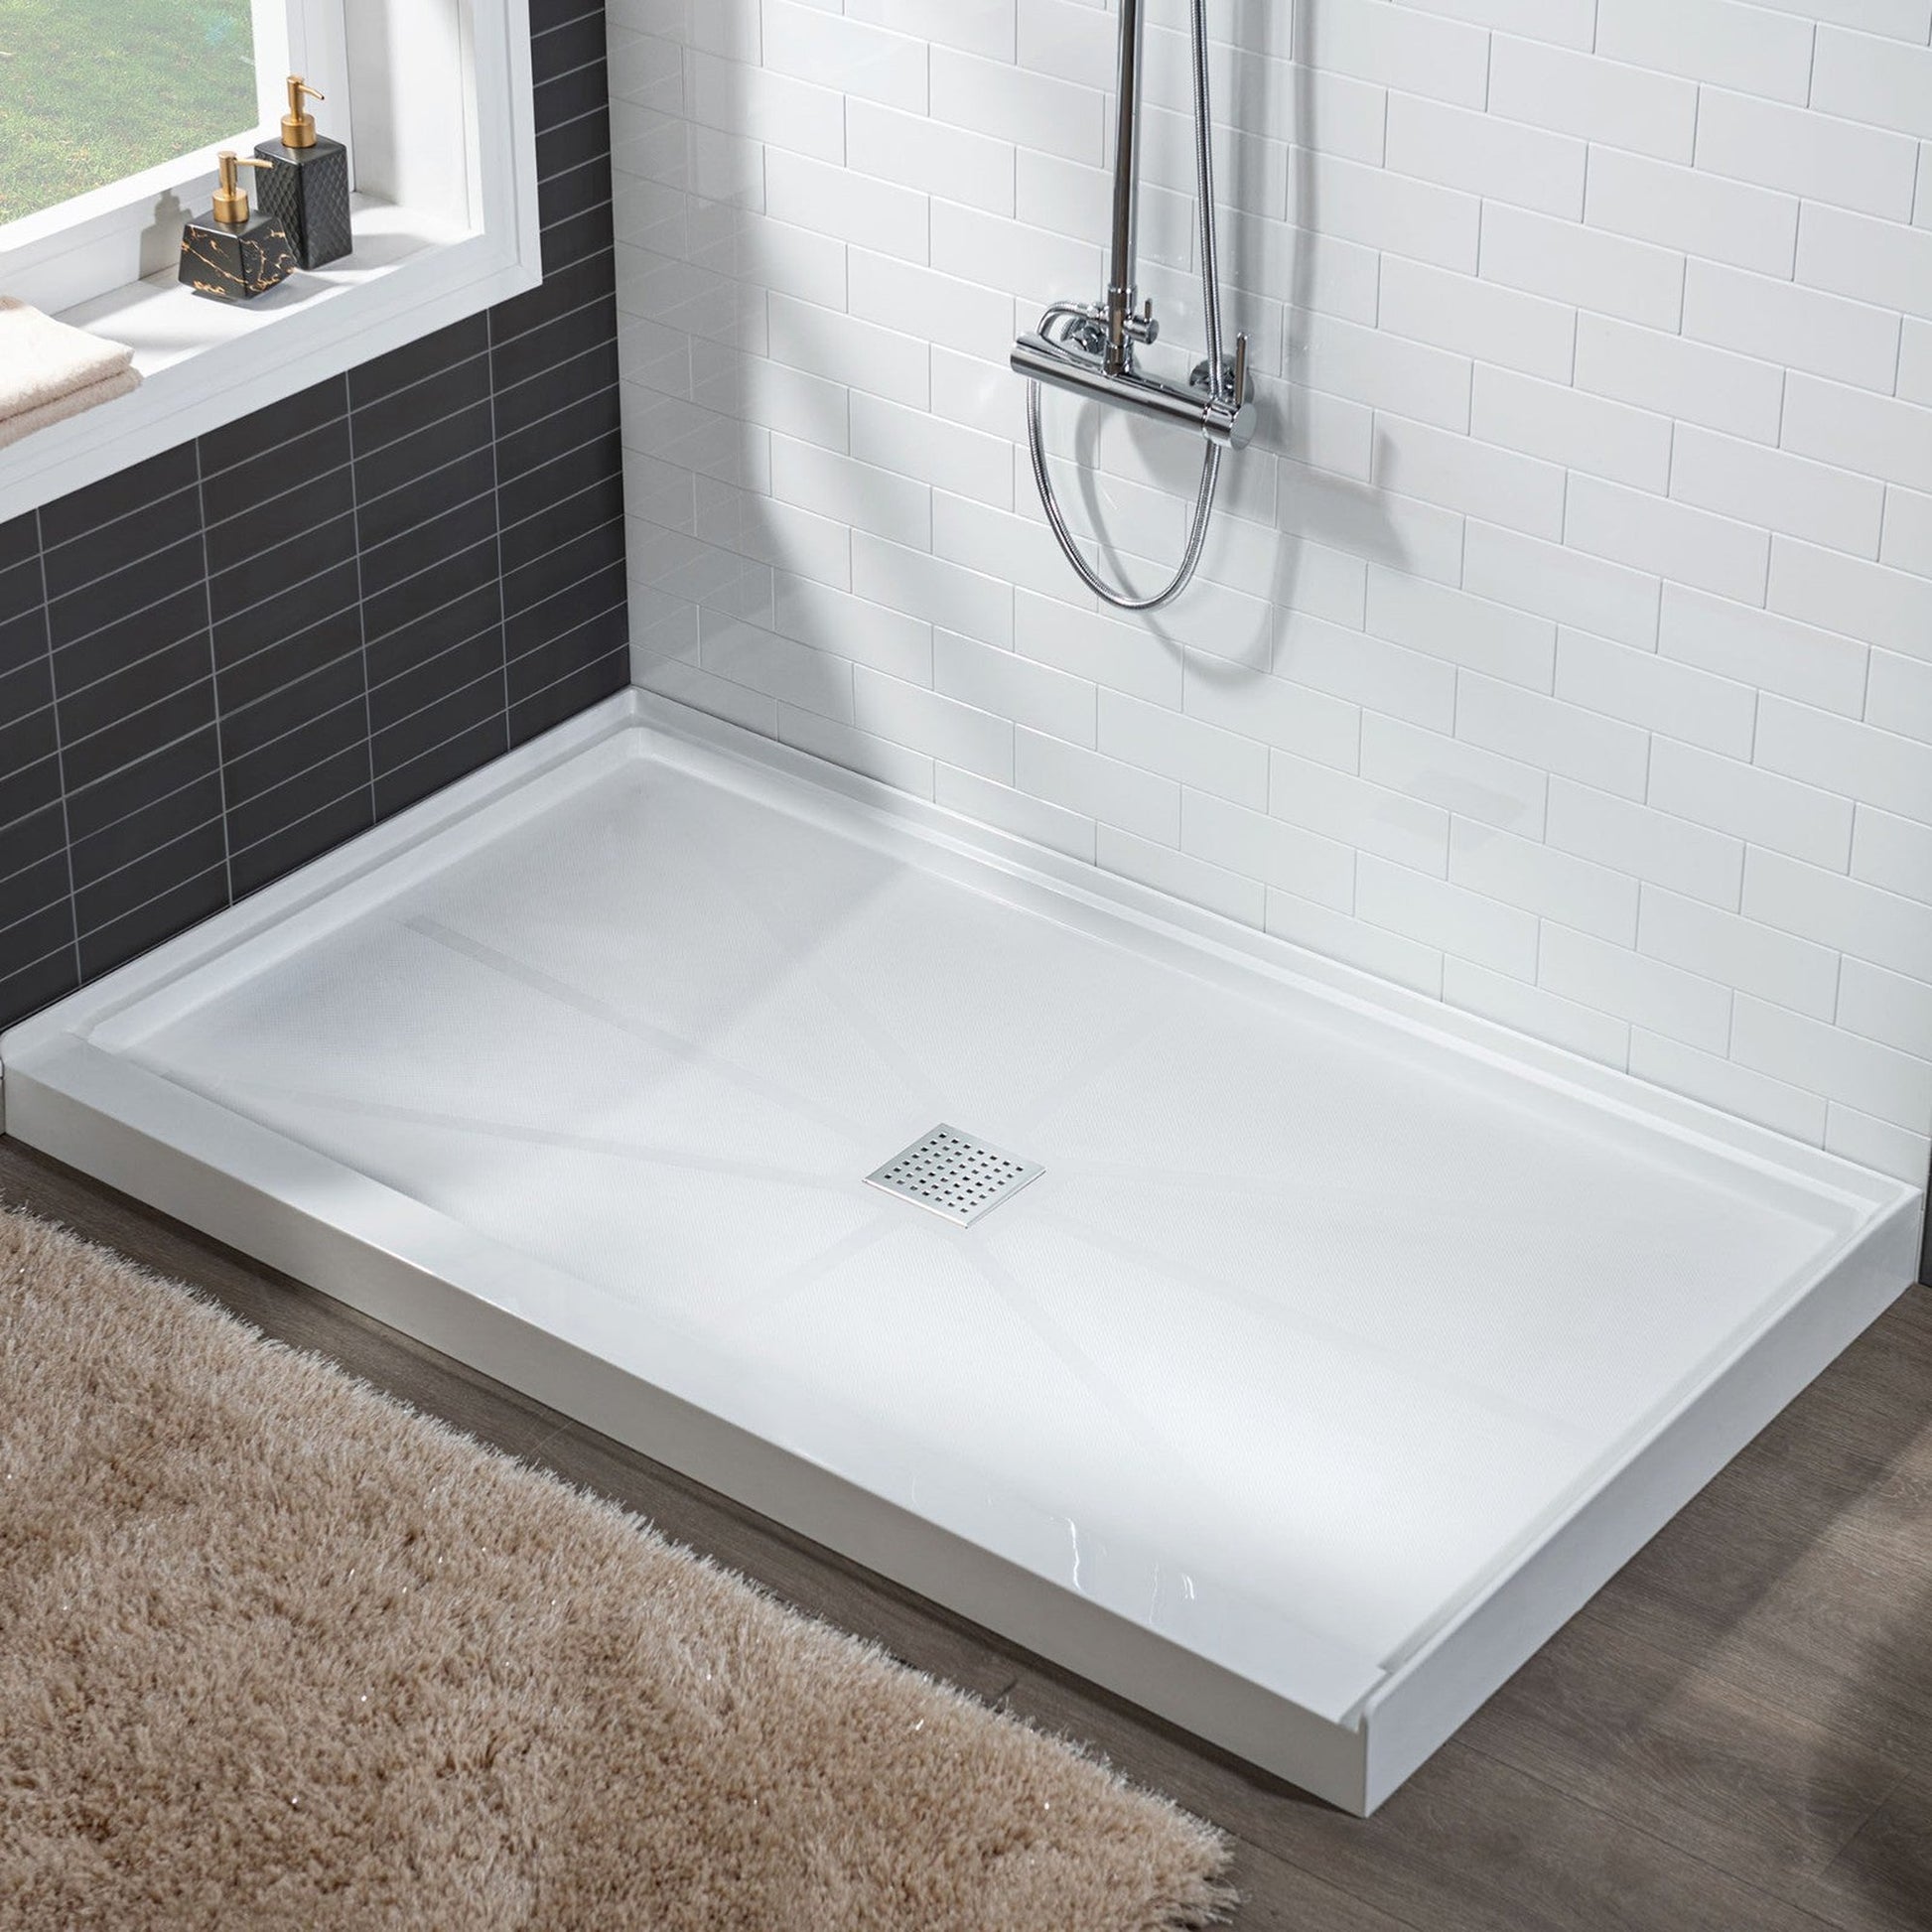 WoodBridge 60" x 32" White Solid Surface Shower Base Center Drain Location With Chrome Trench Drain Cover